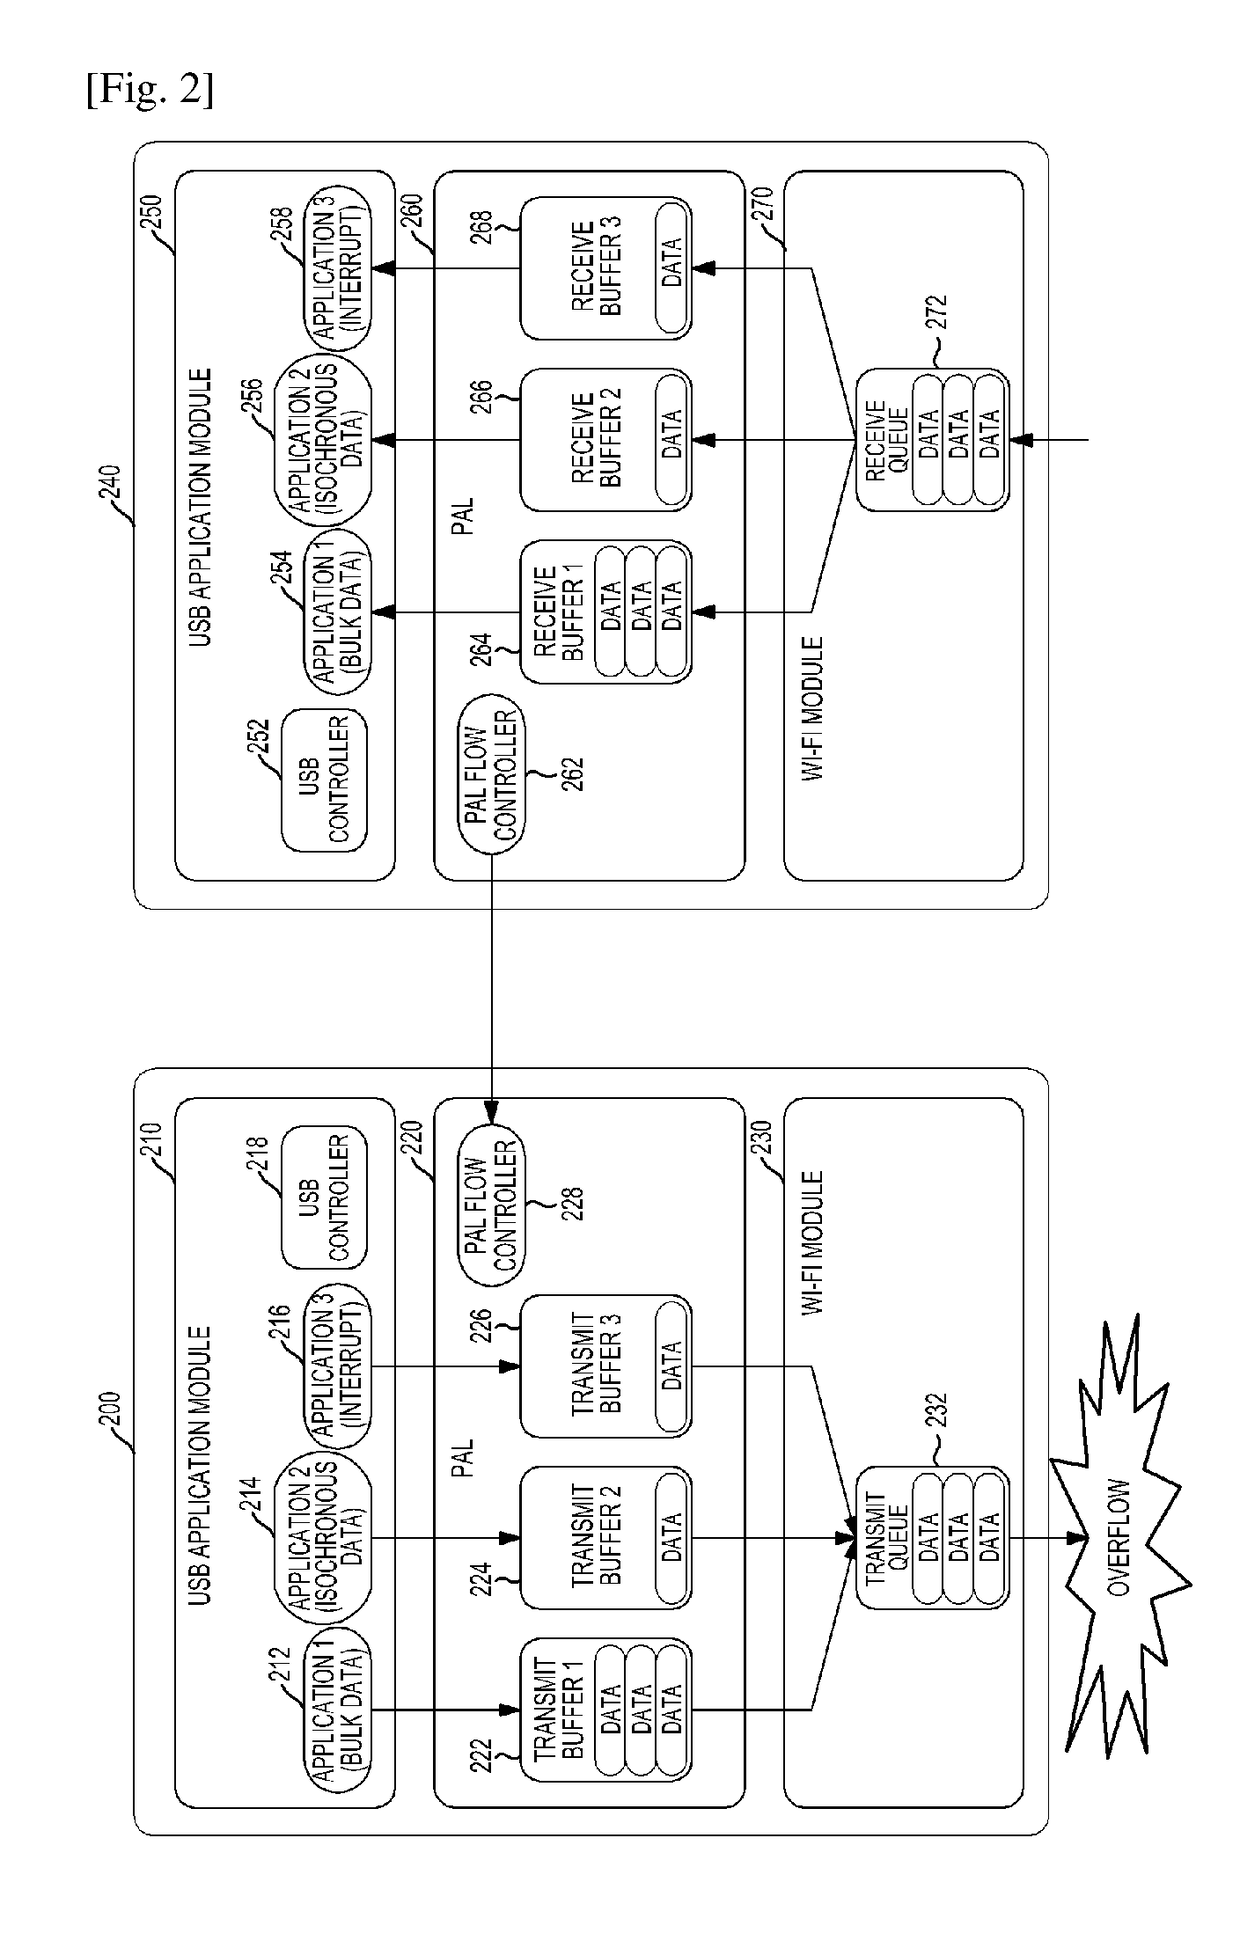 Buffer management method and apparatus for universal serial bus communication in wireless environment